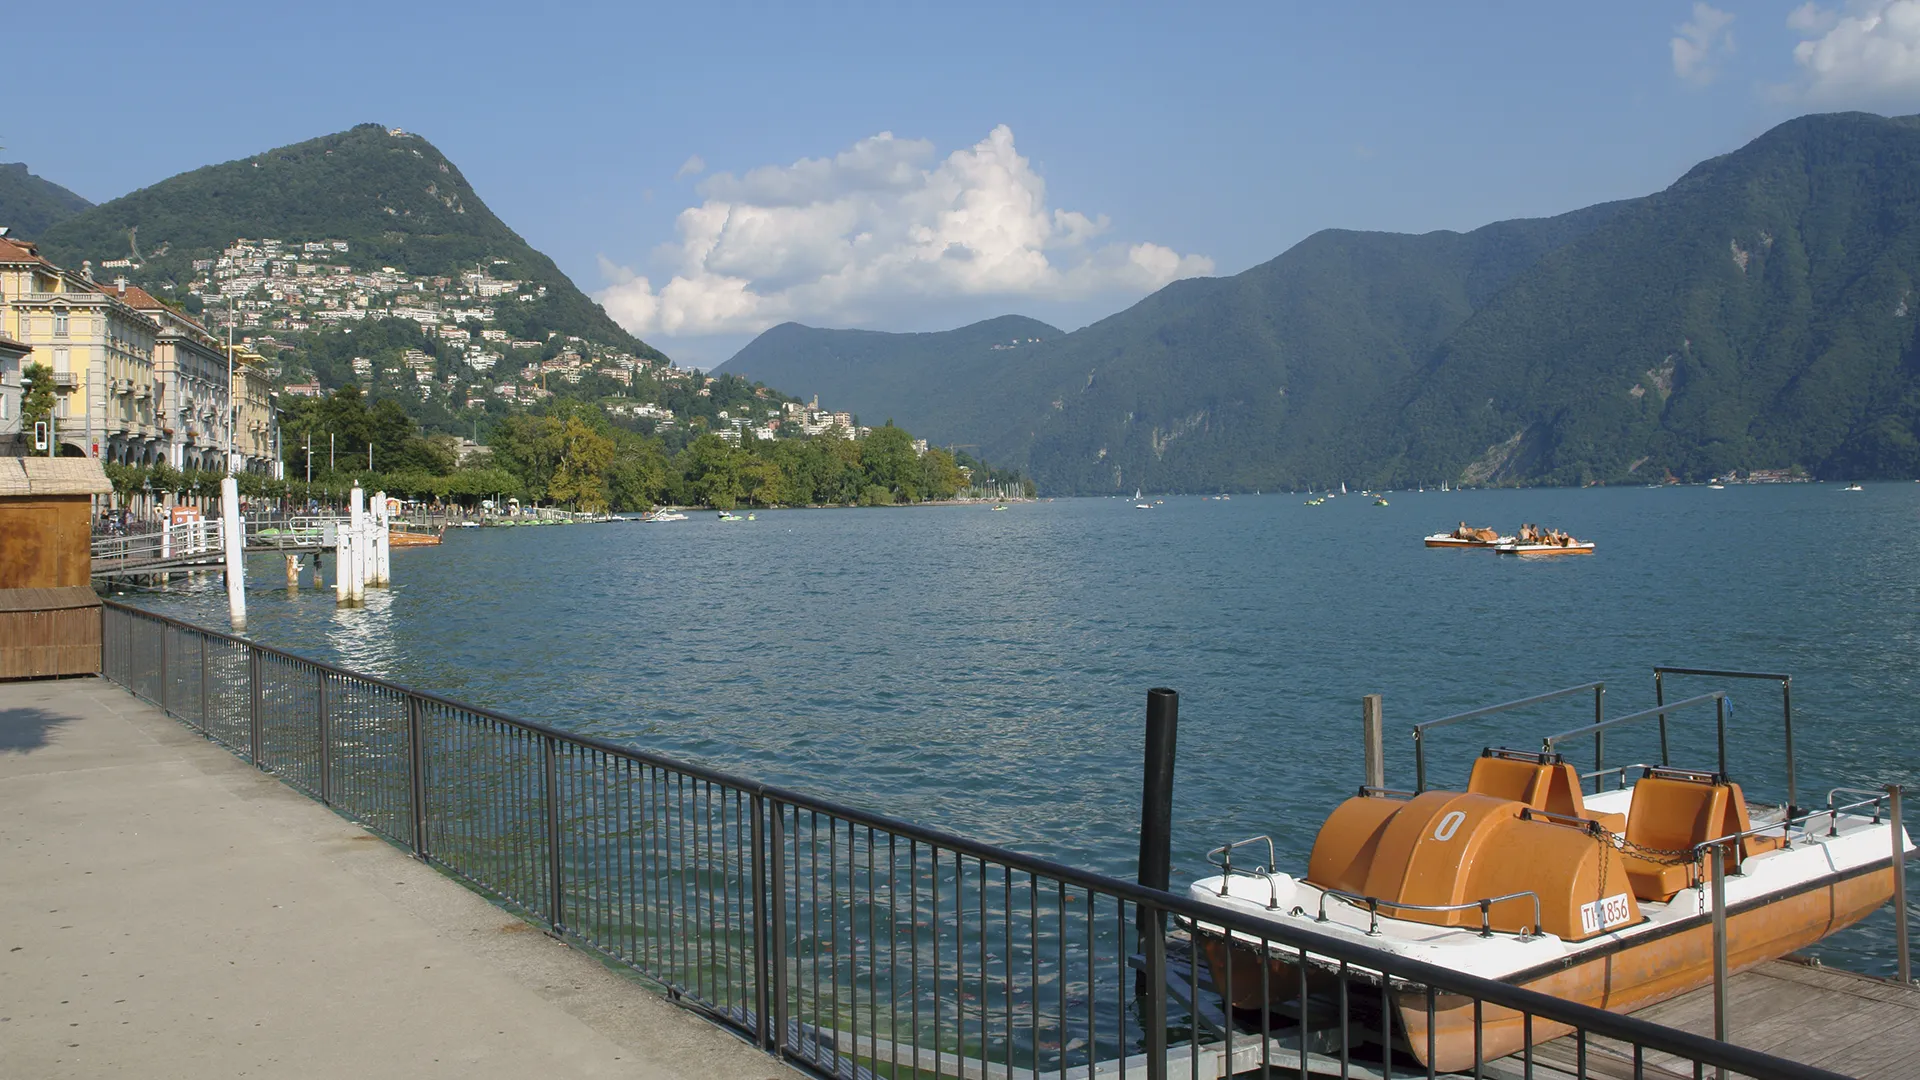 Photo showing: The lake frontage in Lugano, Switzerland, with Monte Brè behind